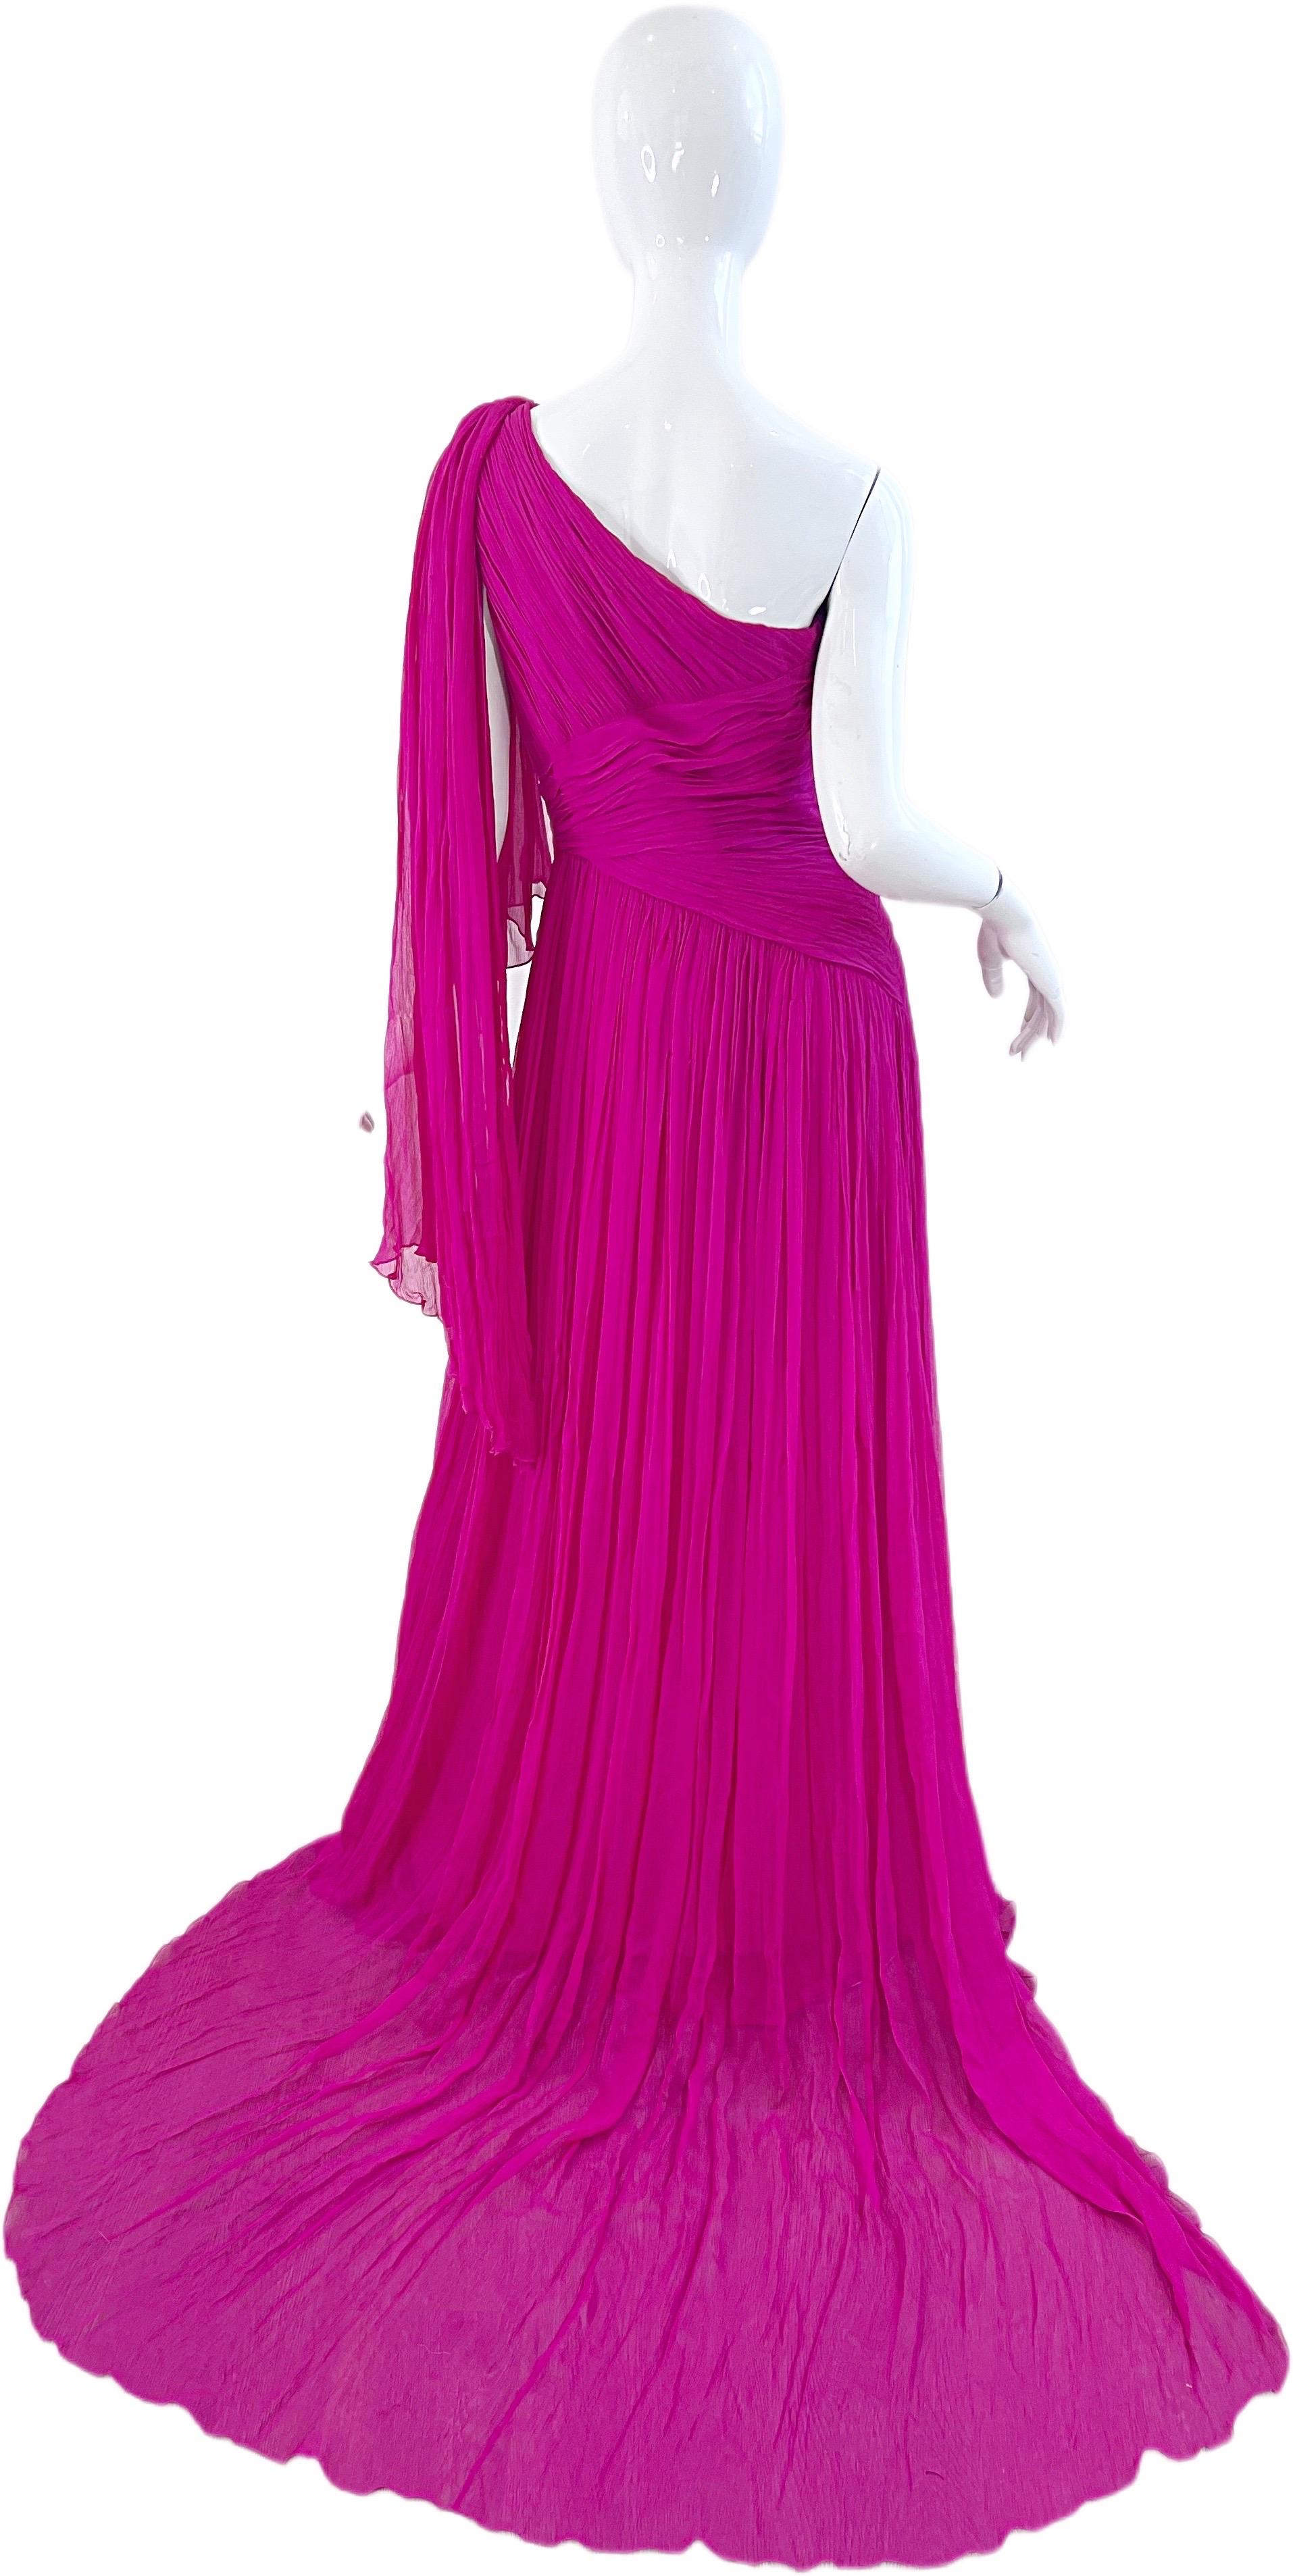 NWT Pamella Roland Spring 2018 Sz 6 / 8 Hot Pink Silk Chiffon One Shoulder Gown For Sale 1